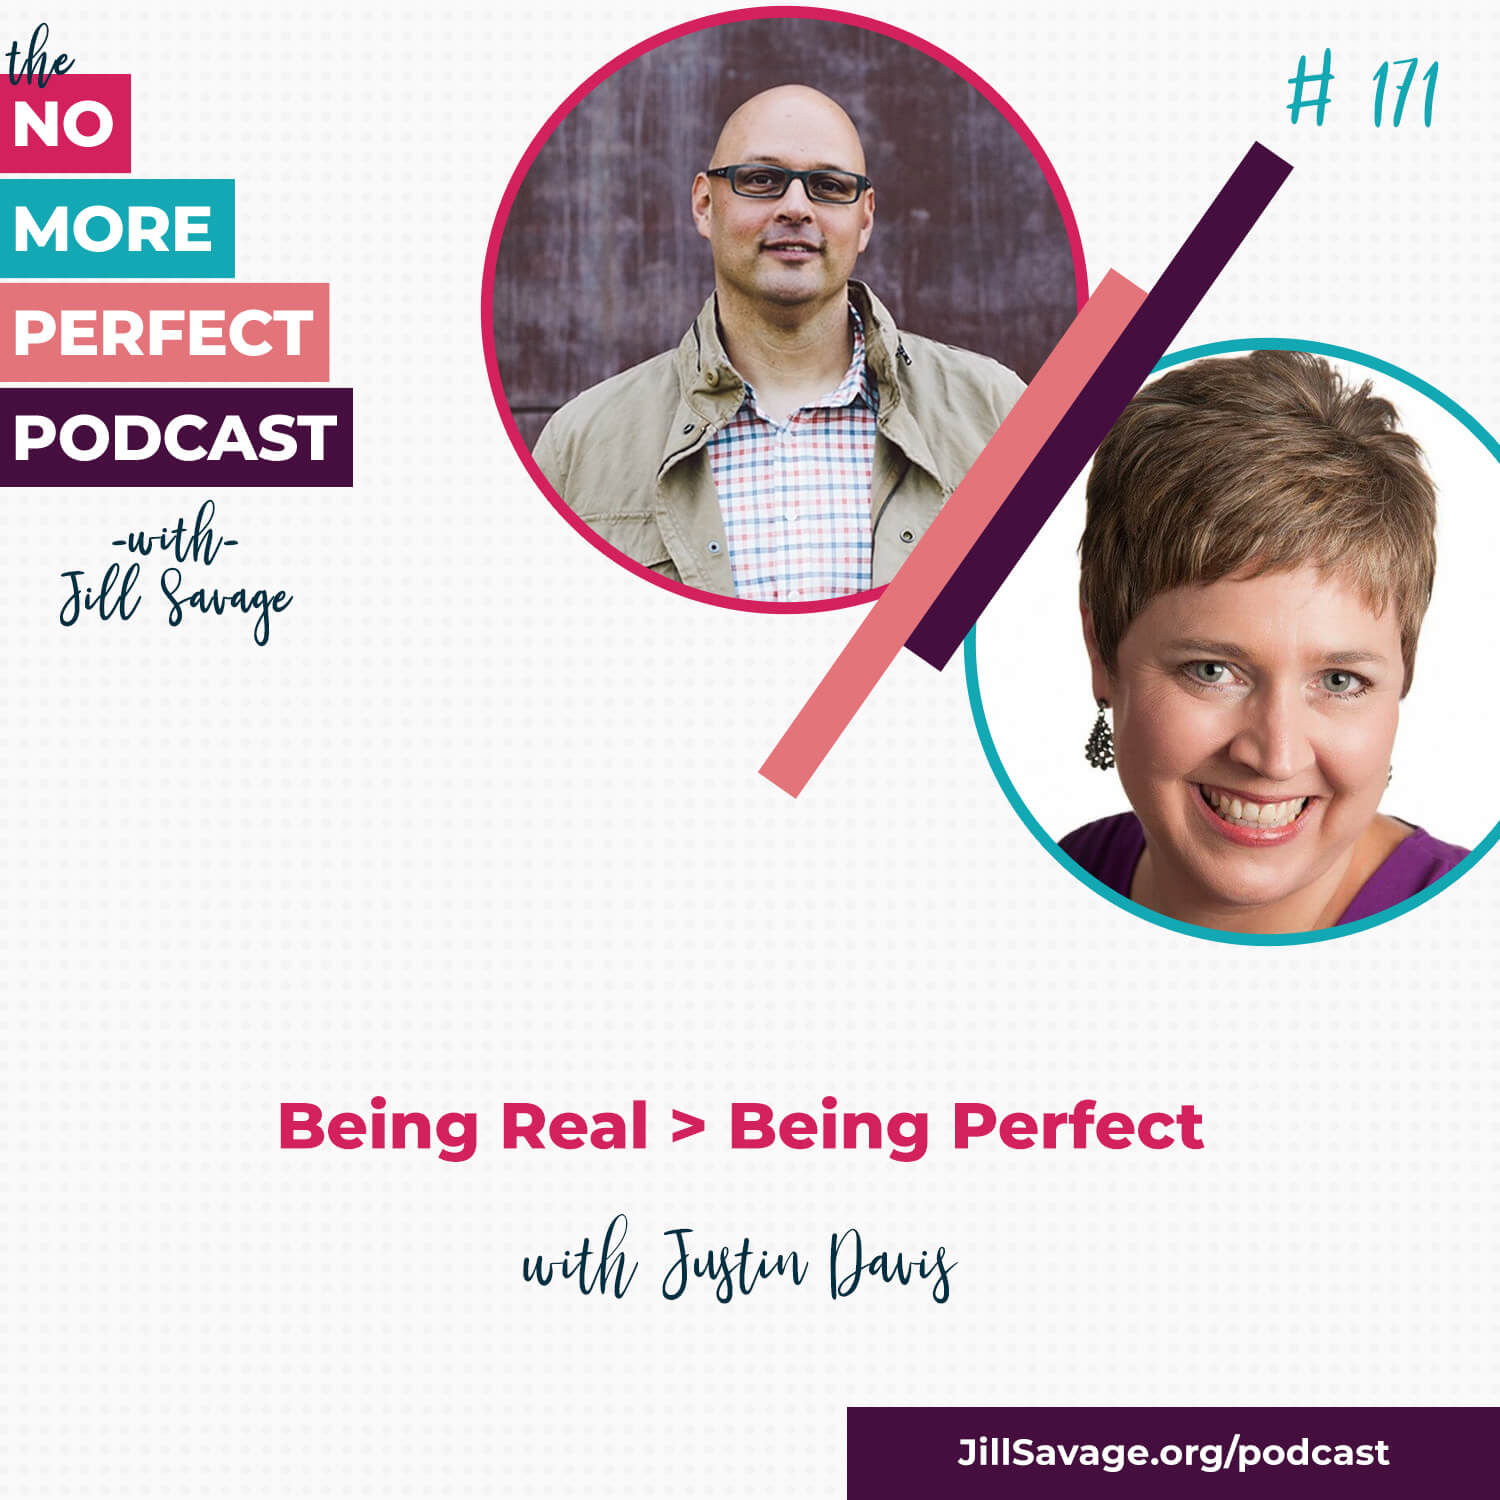 Being Real > Being Perfect with Justin Davis | Episode 171